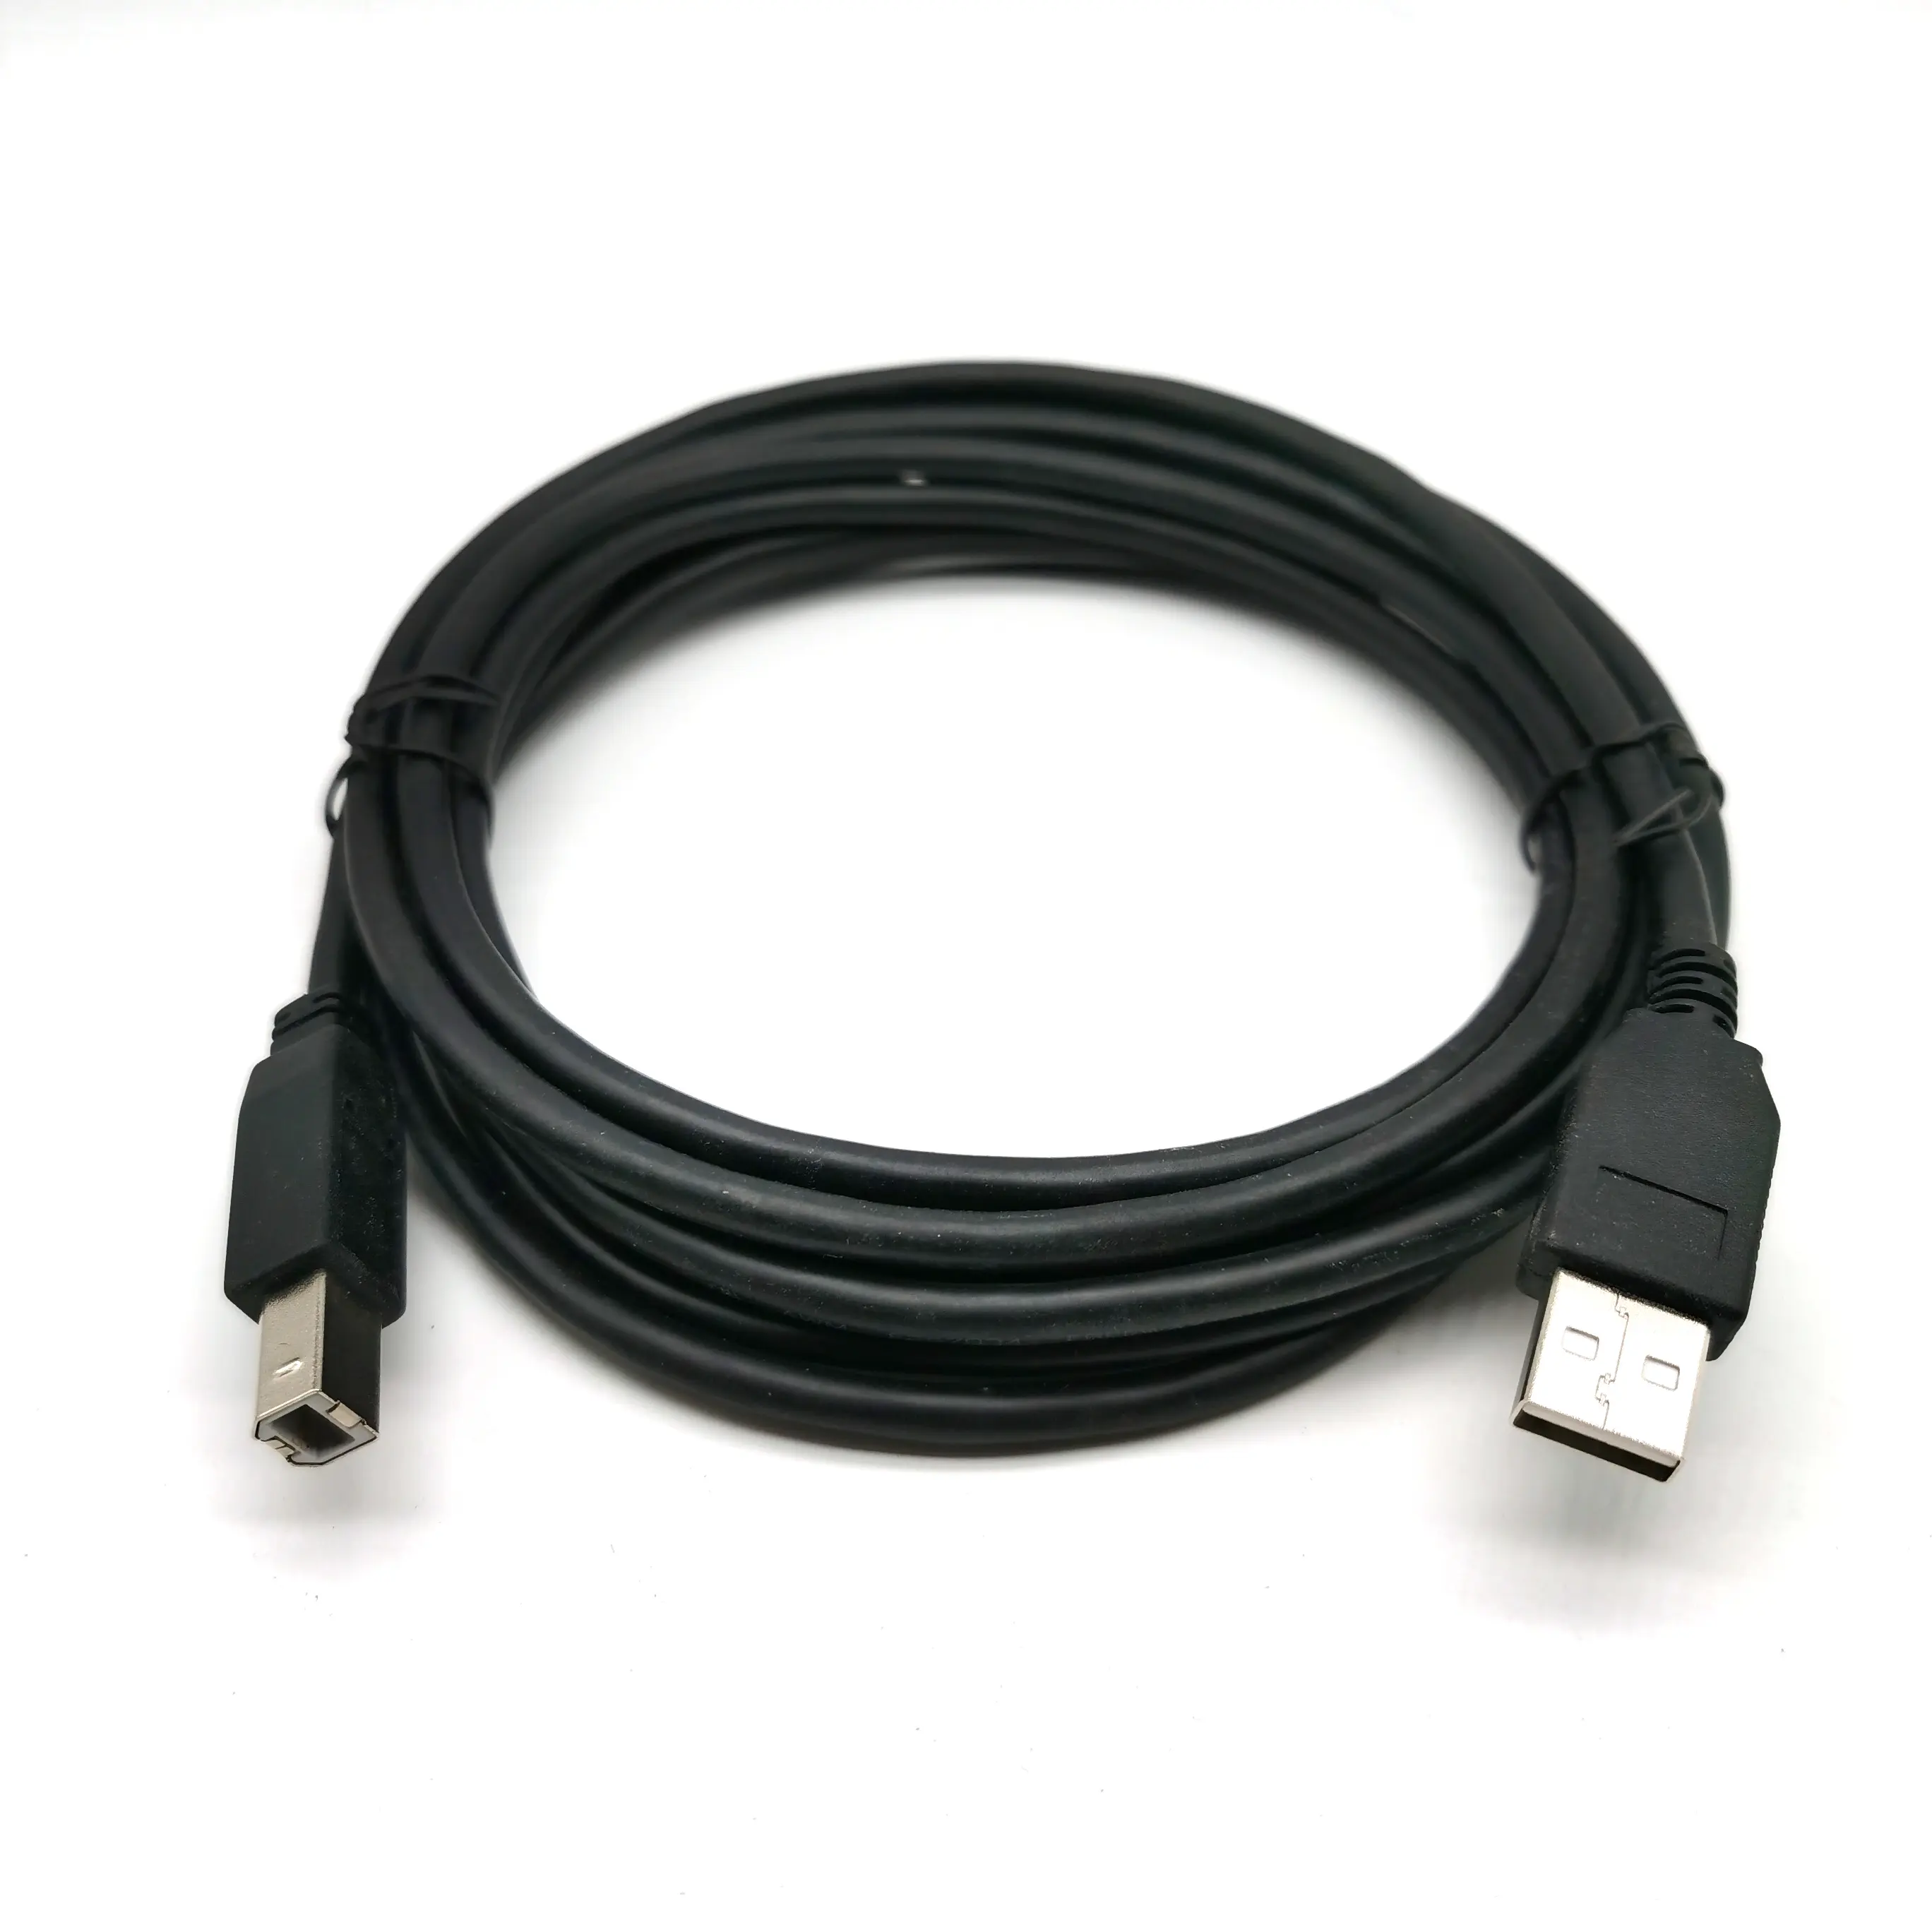 Black USB A Male to B Male Connector Printer Cable 1 meter